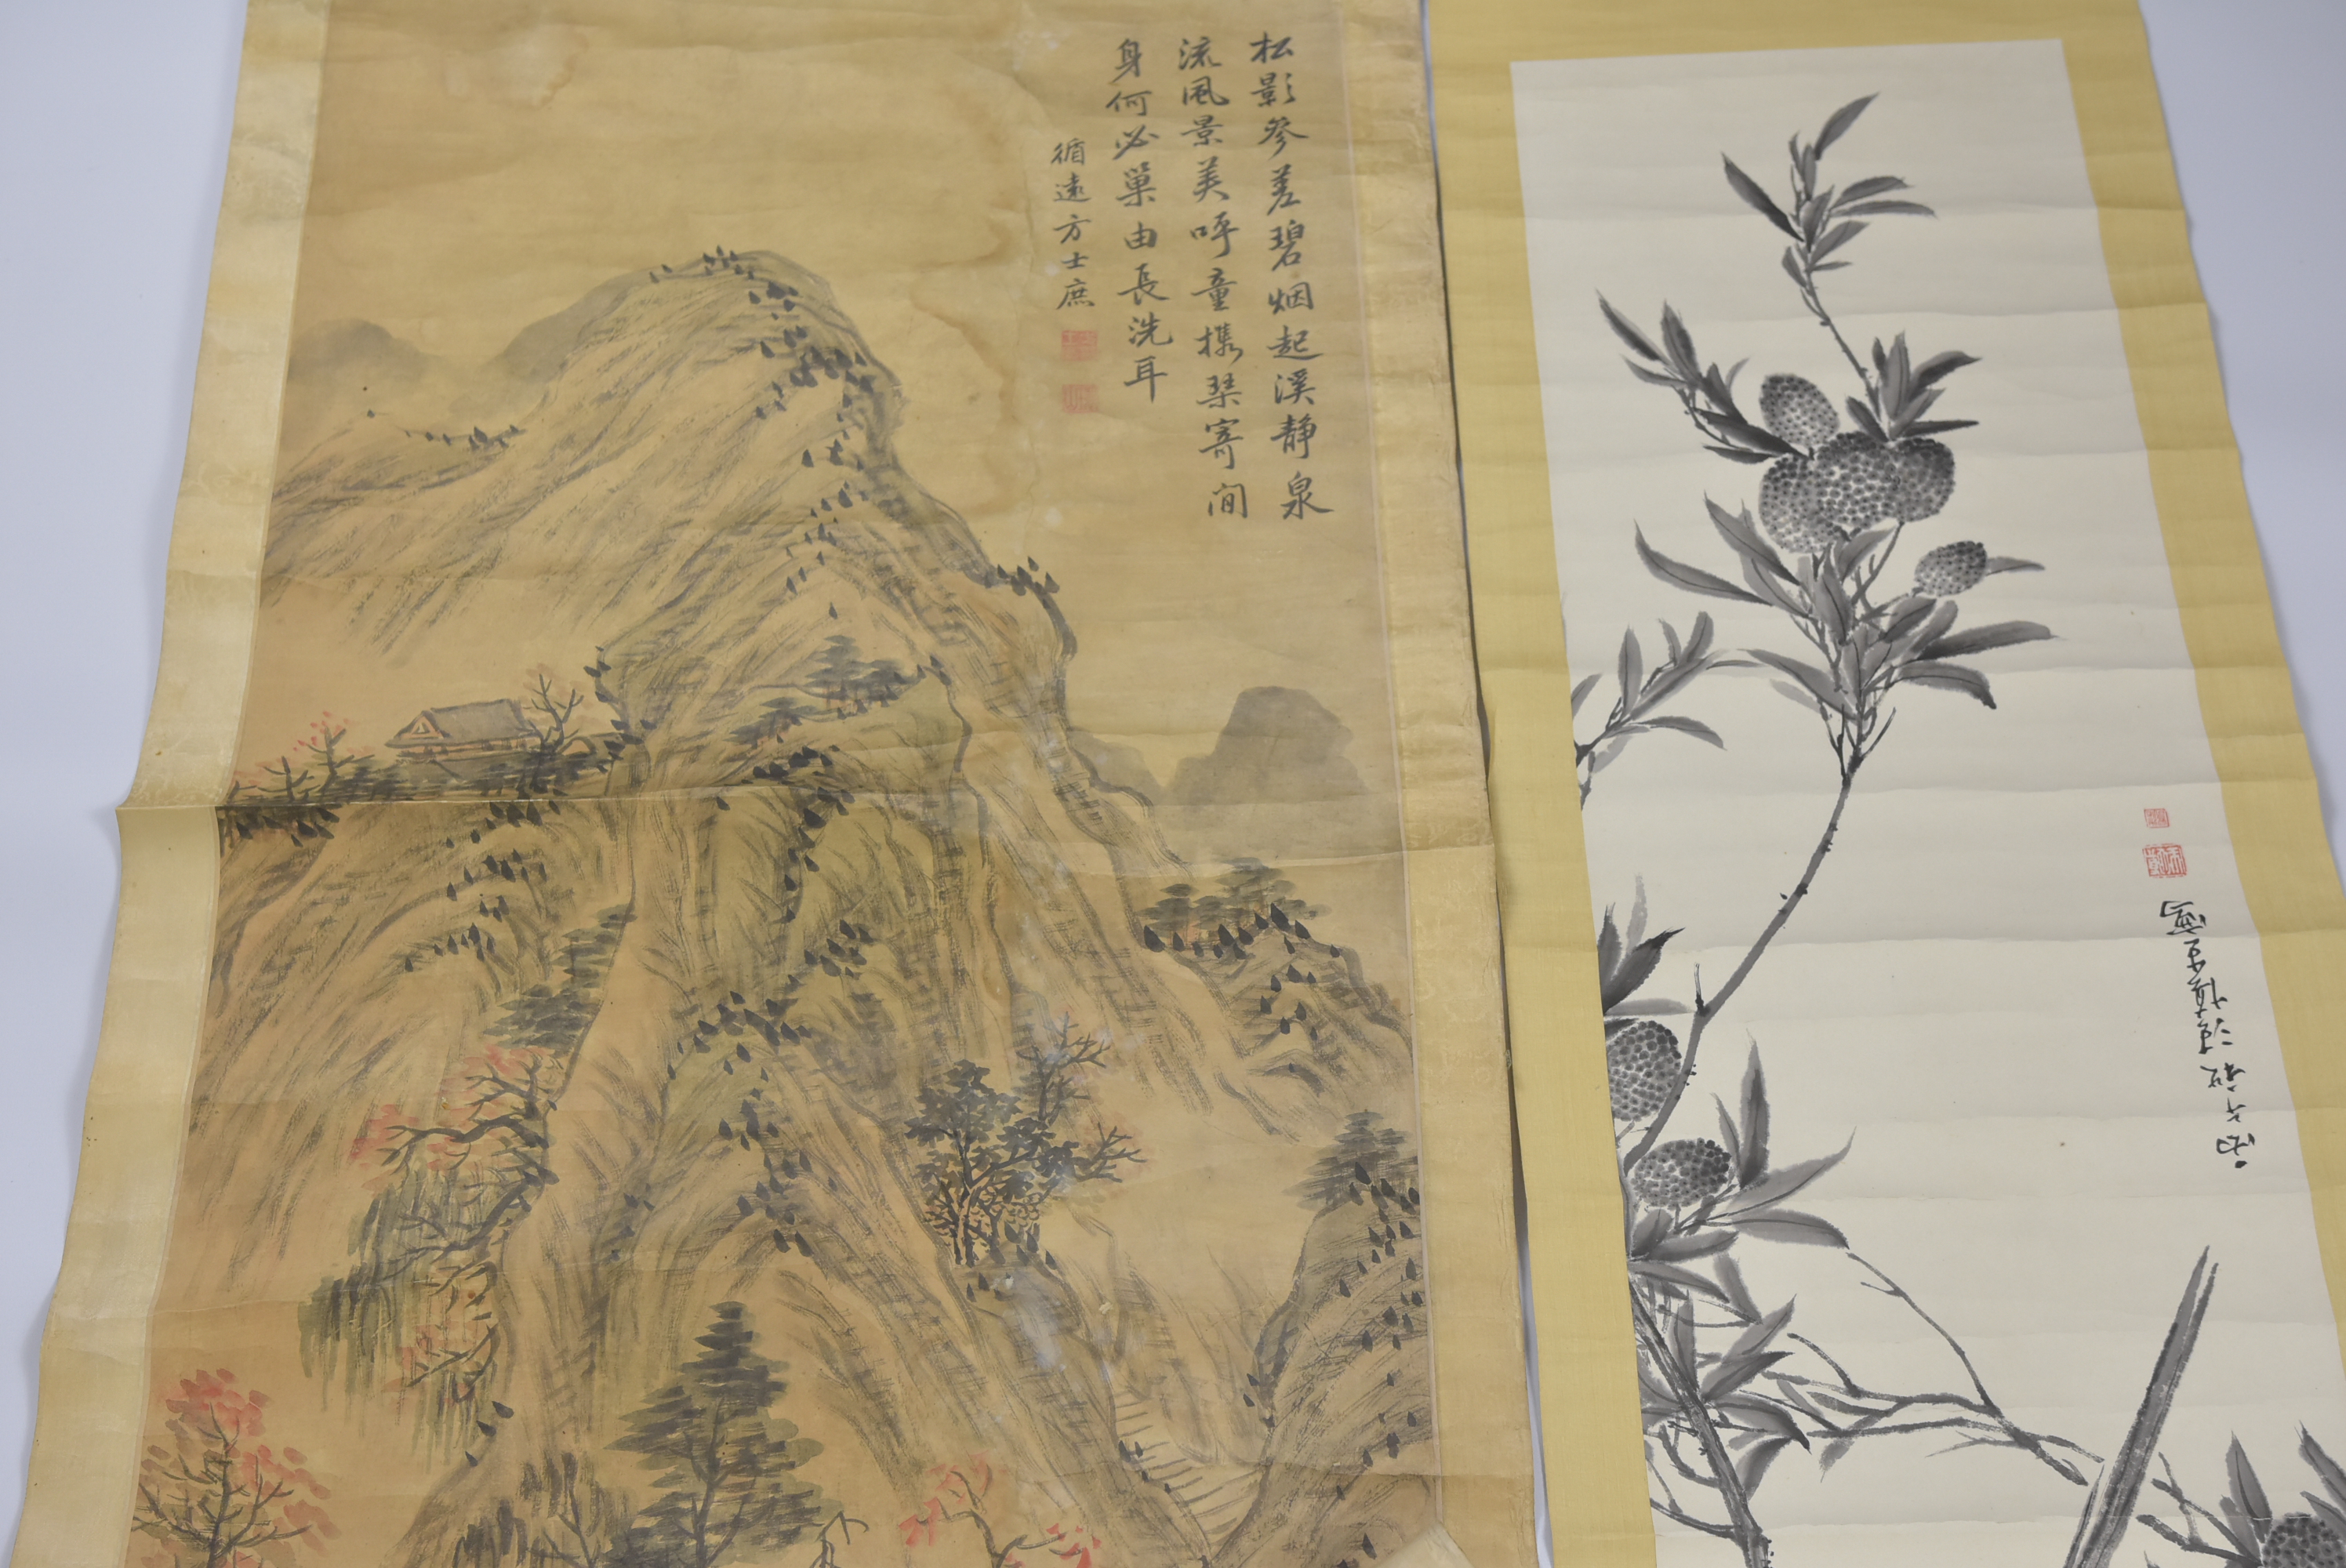 Two Chinese 19th century water colour paintings of mountains a rivers.144 cm x 28.5 cm and 210 cm x - Image 2 of 7